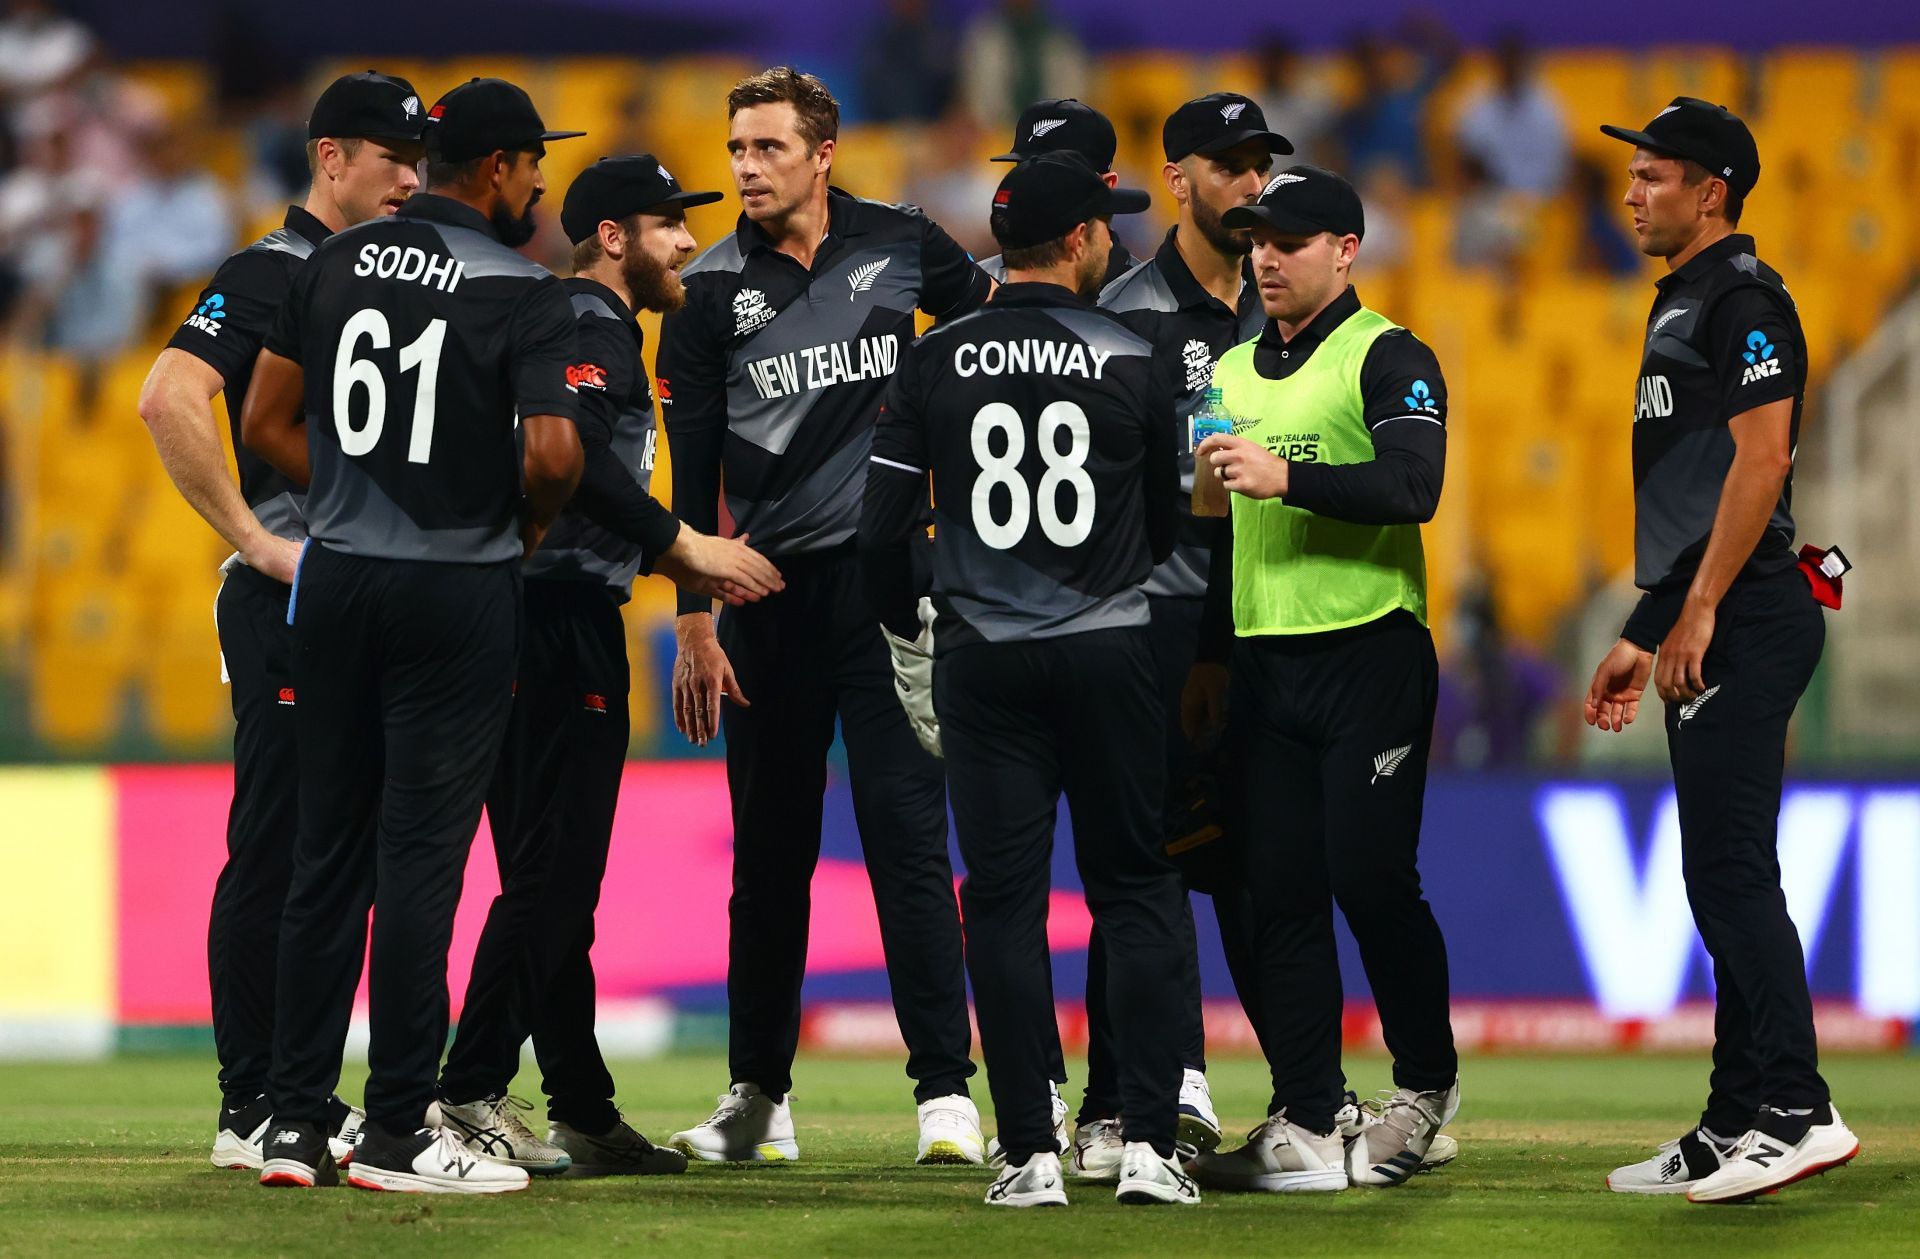 Aakash Chopra wants New Zealand to win the T20 World Cup 2021 title.